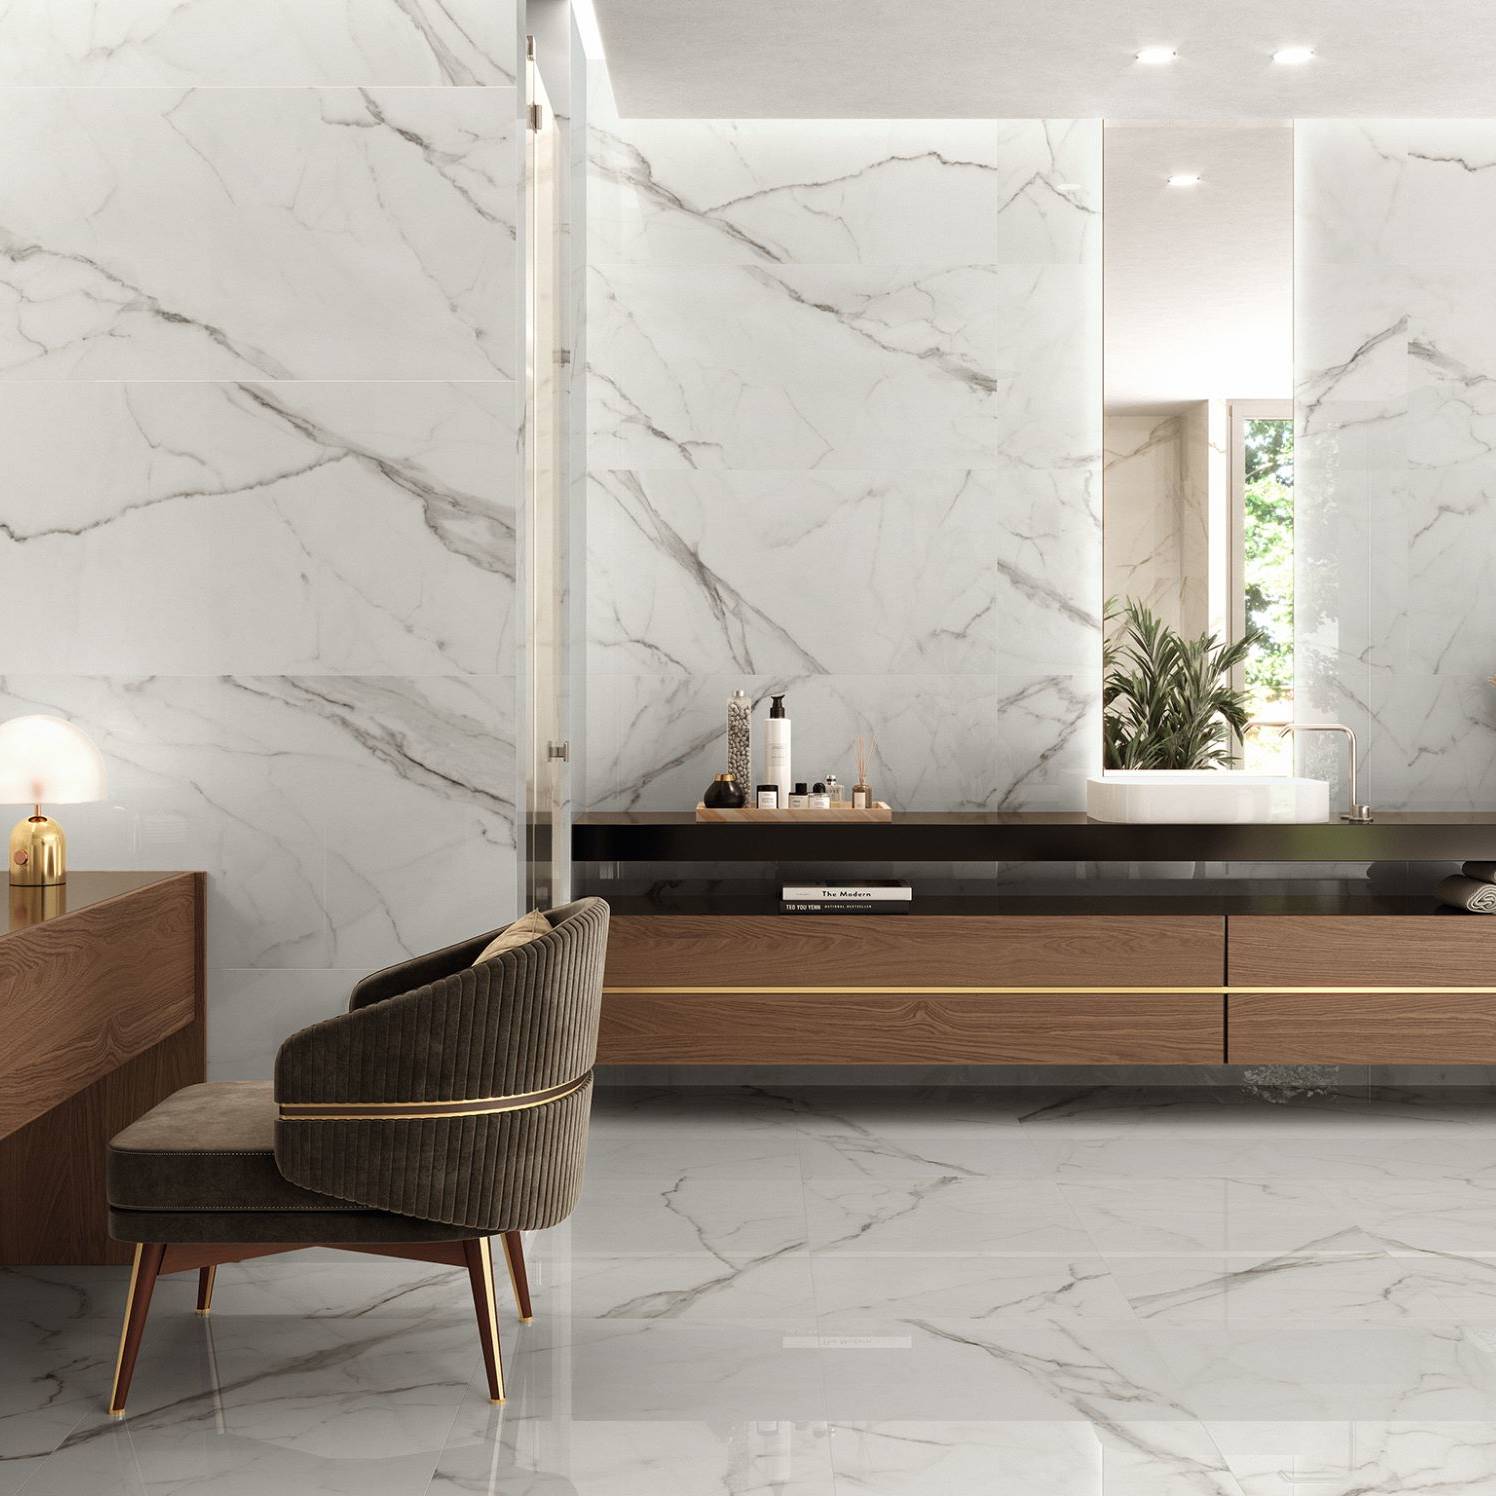 Kinsale_1_G | Stones & More | Finest selection of Mosaics, Glass, Tile and Stone